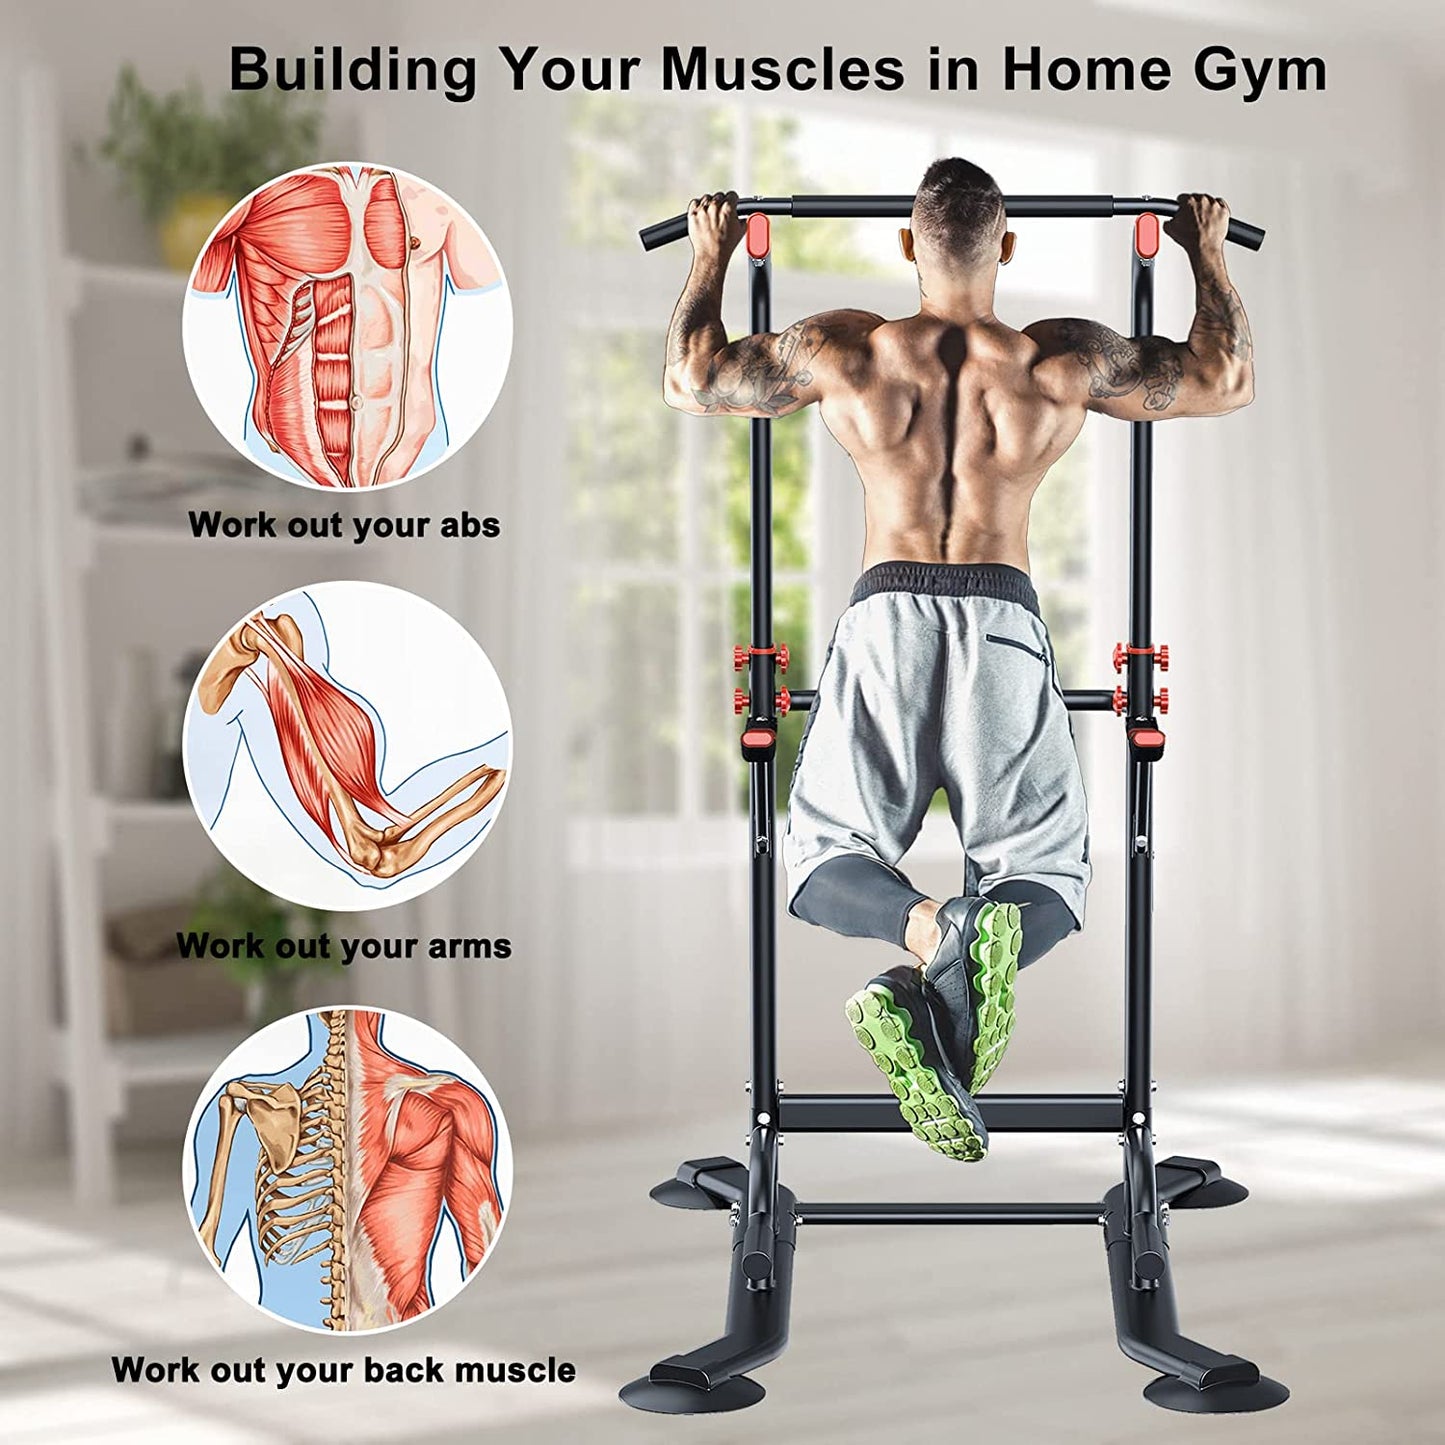 Dripex Multi-Function Power Tower-Pull Up Bar Station for Home Gym-Dip Station Workout Strength Training Fitness Equipment-Height Adjustable Pull up/Dip Bar 330LBS